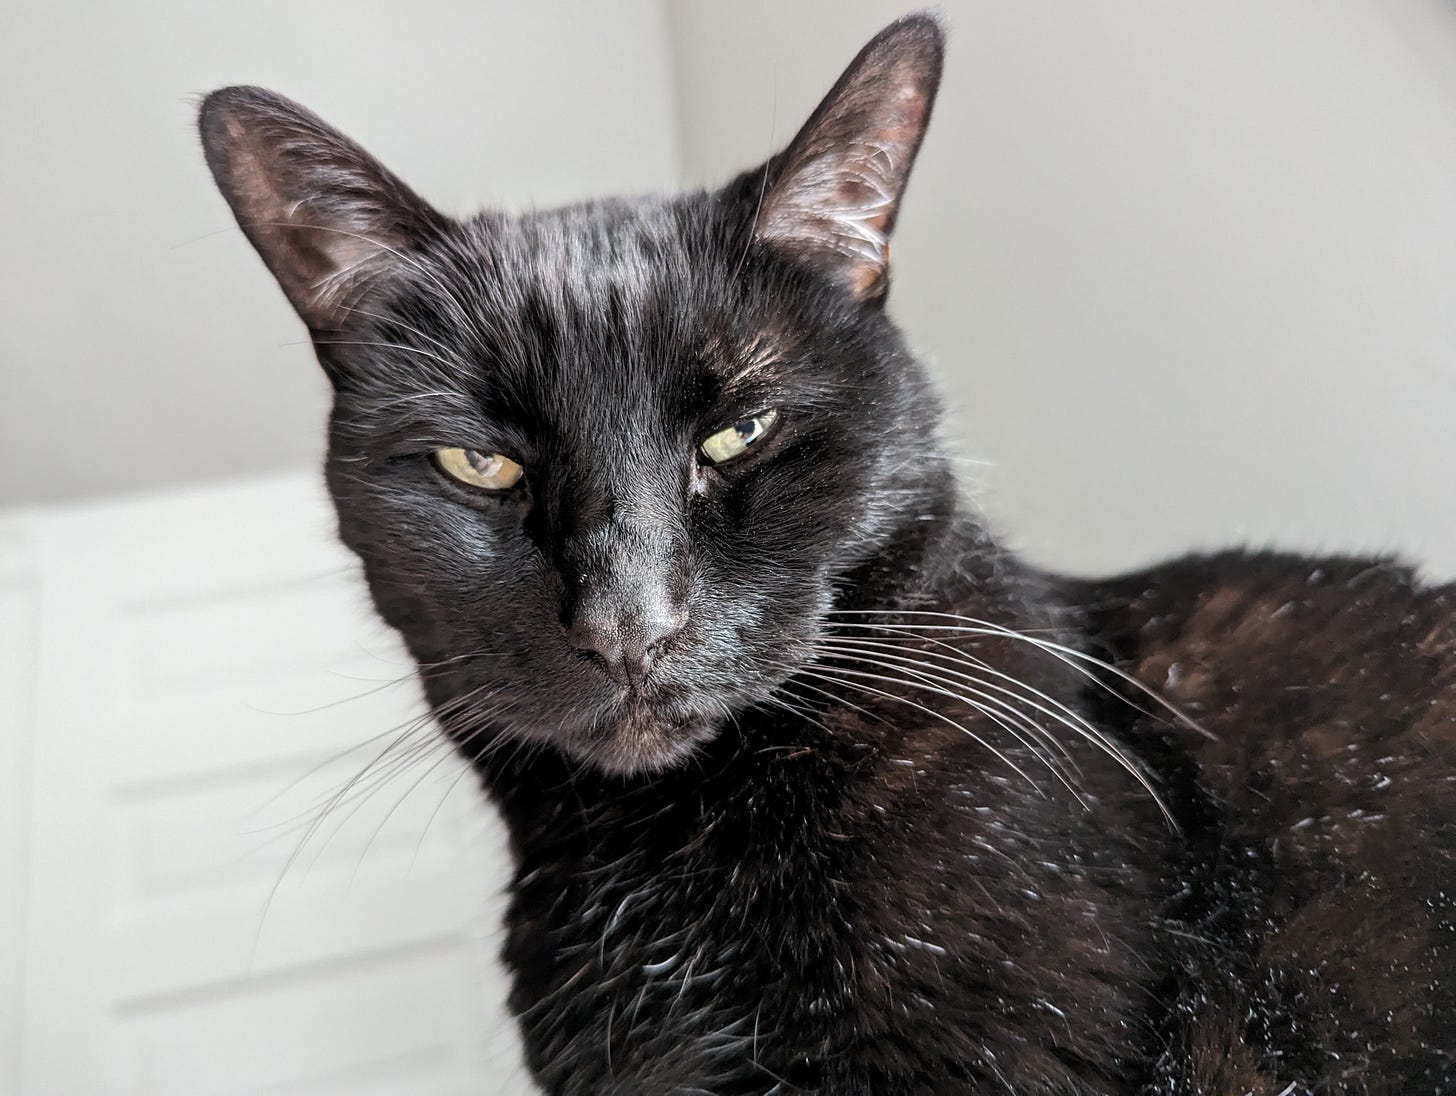 A black cat, shown from the shoulders up, stares intently into the camera against a gray and white backdrop.